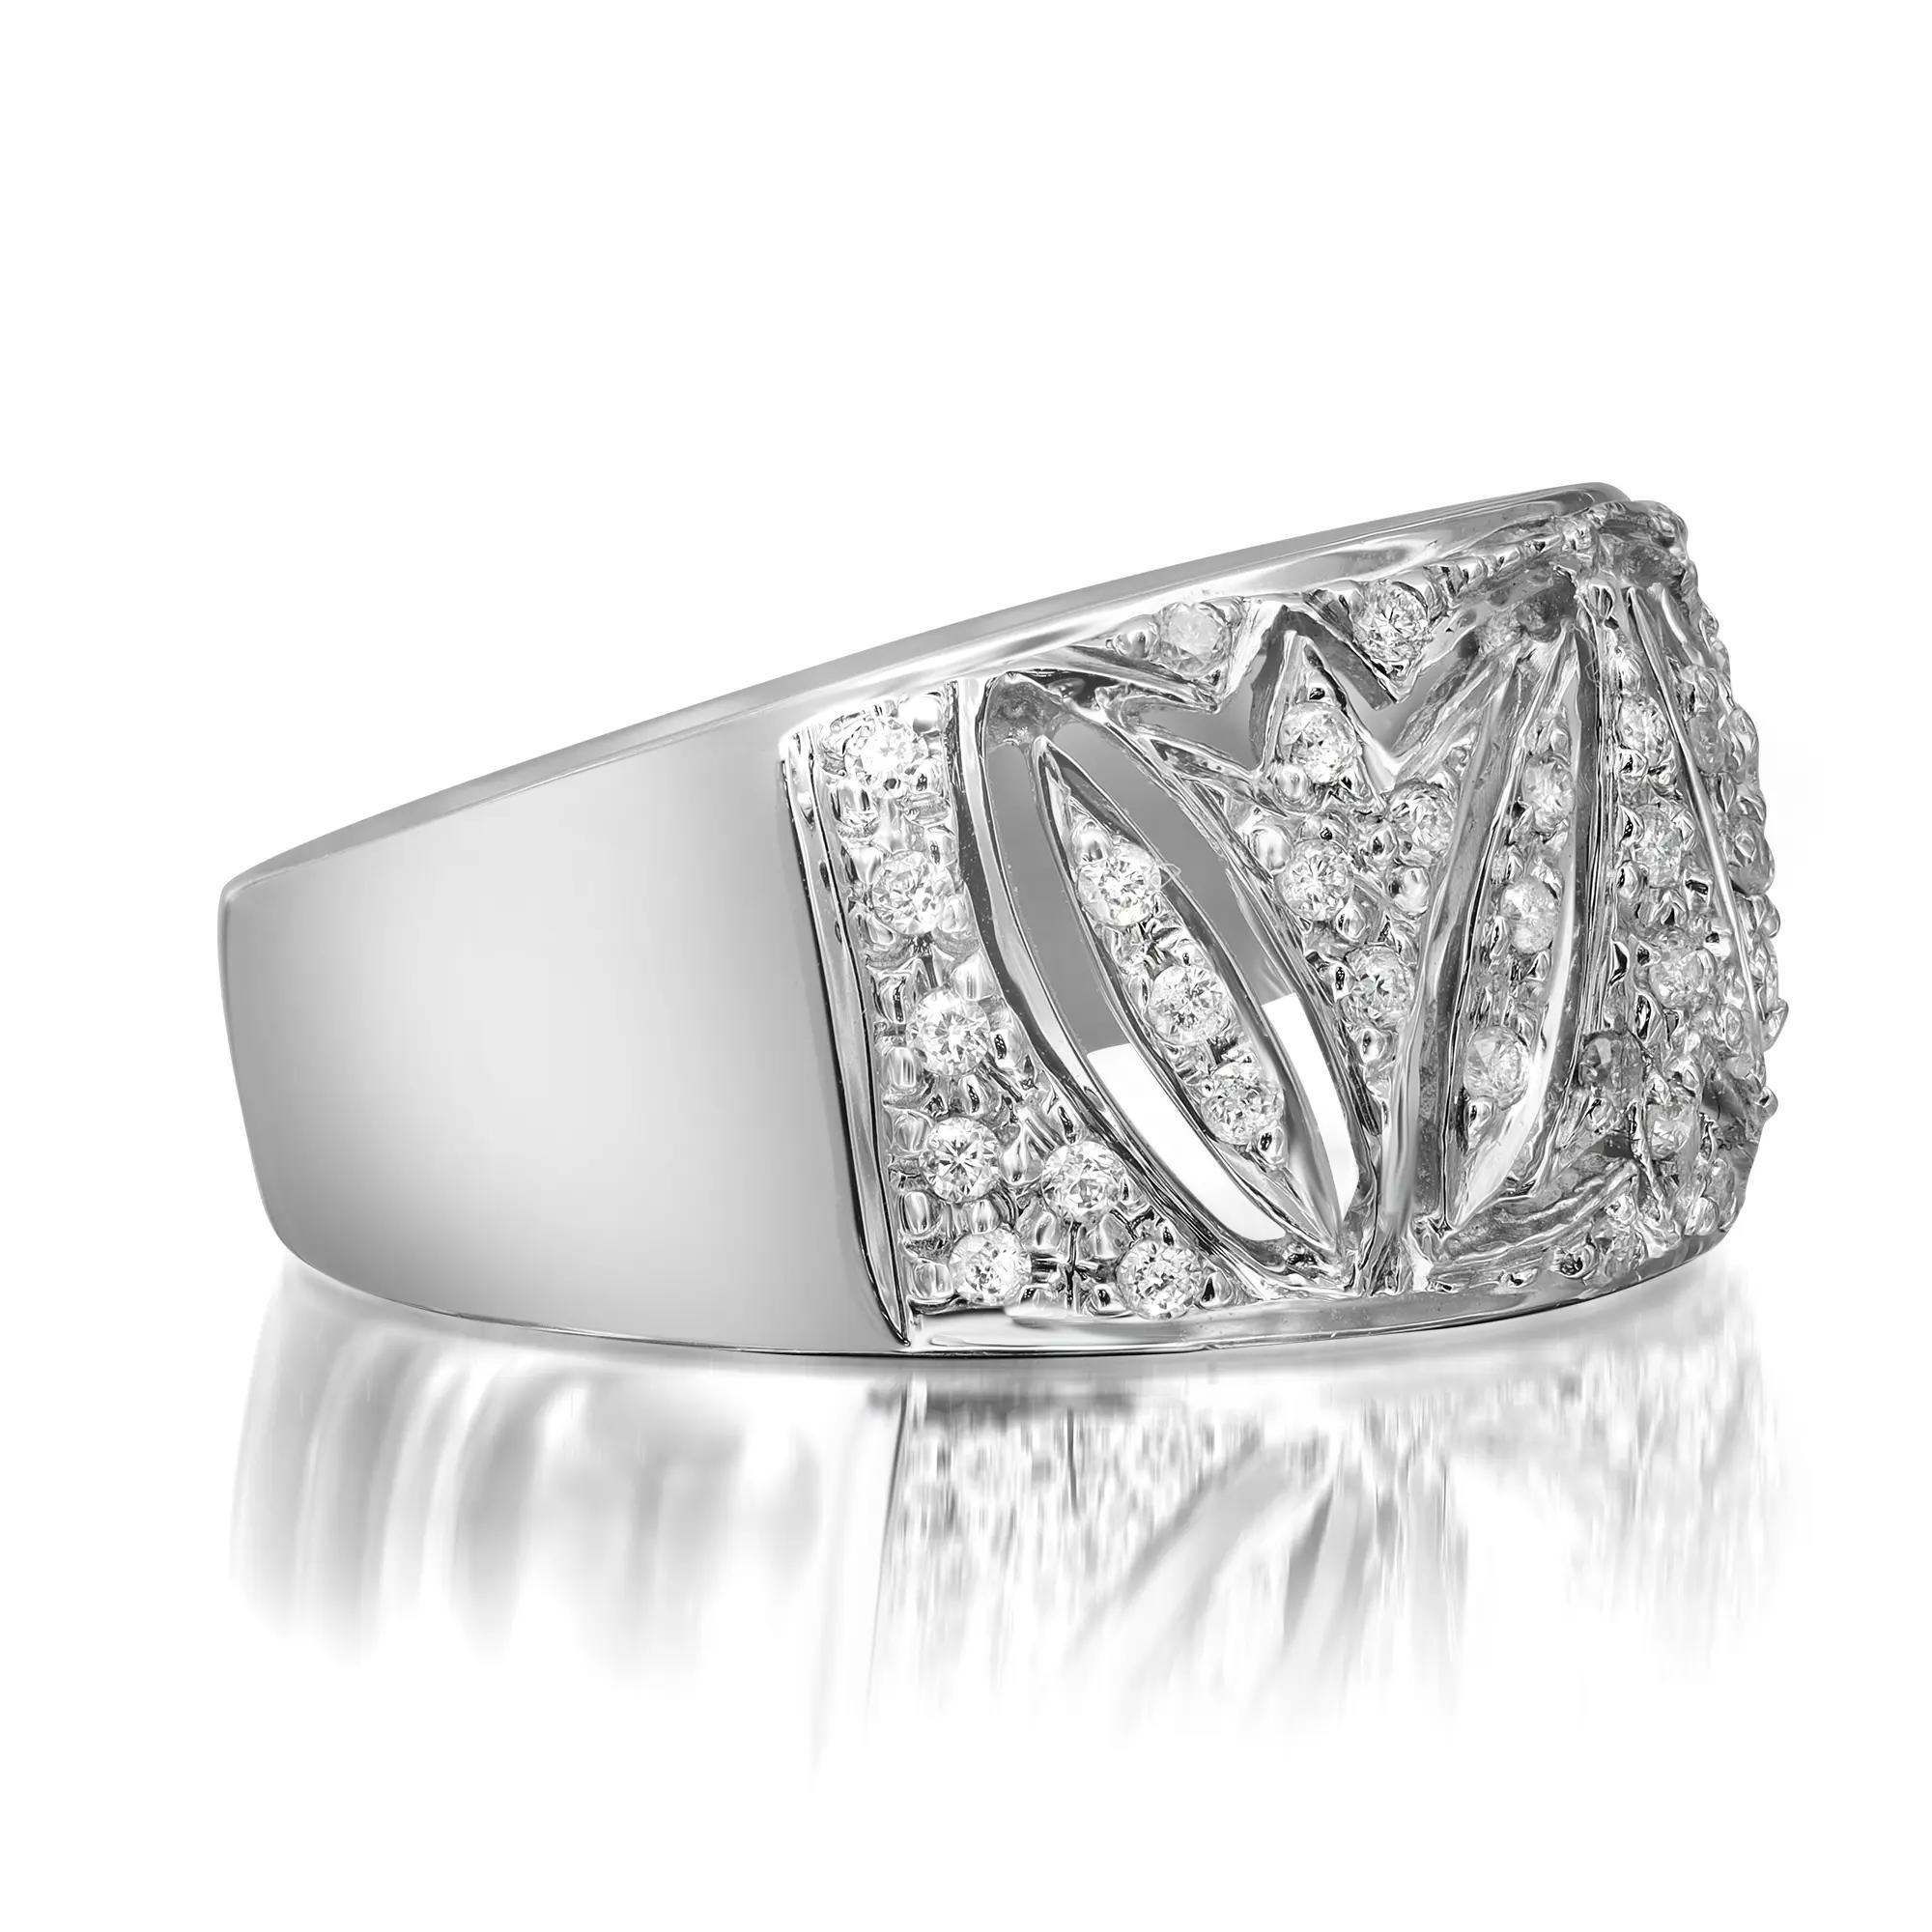 Speak of the bold and beautiful diamond wide band ring. This ring features pave set shimmering round brilliant cut diamonds crafted in high polished 14K white gold. Total diamond weight: 0.27 carat with color I and SI1 clarity. Ring size: 7.5. Ring